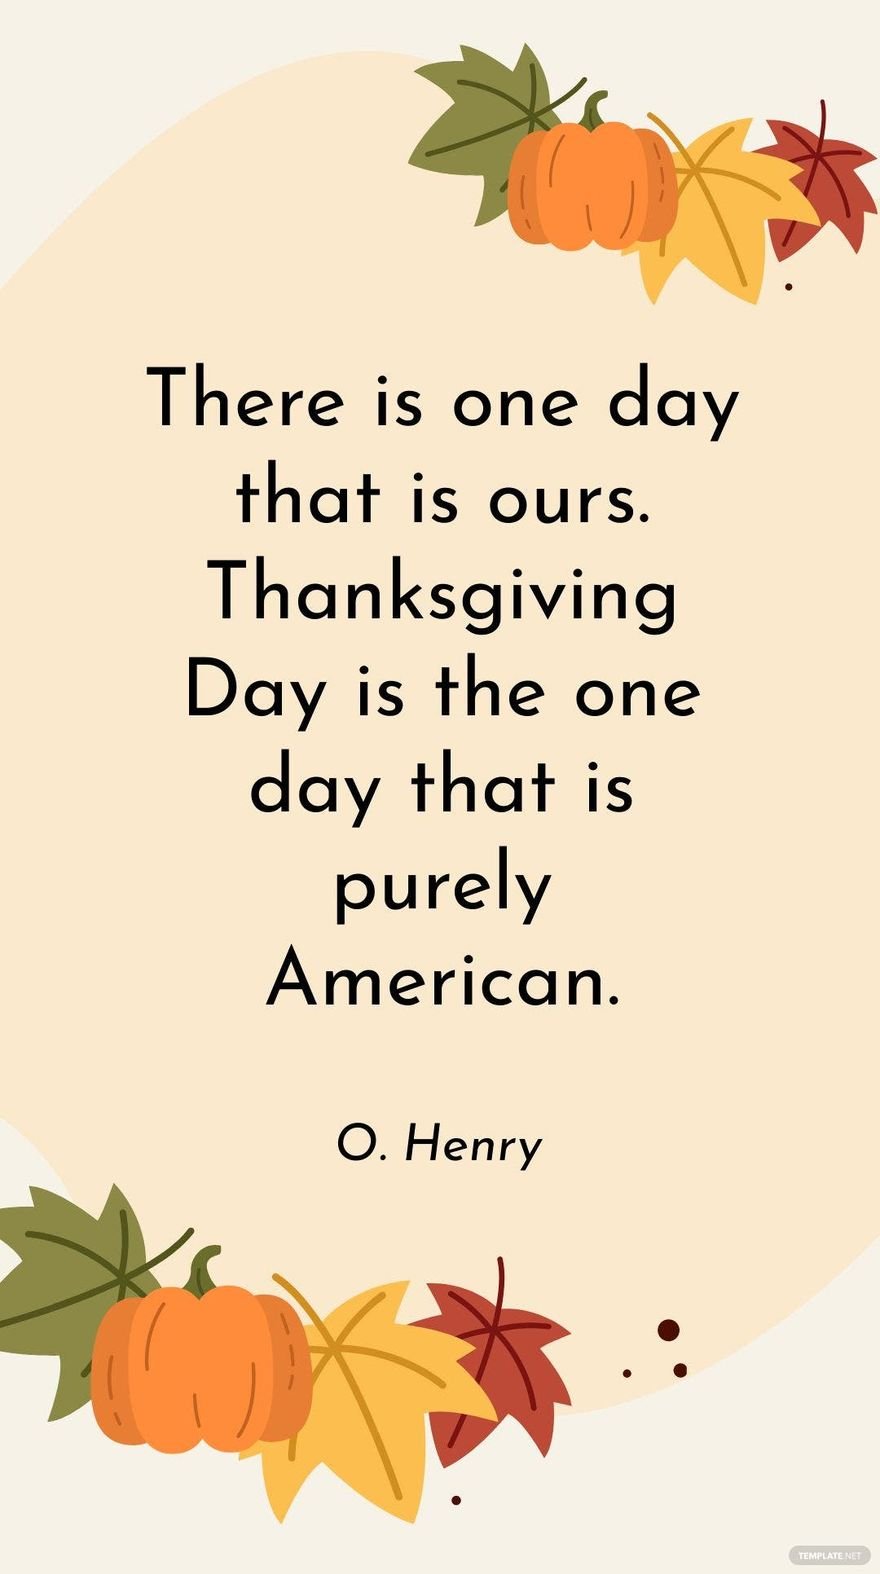 O. Henry - There is one day that is ours. Thanksgiving Day is the one day that is purely American.